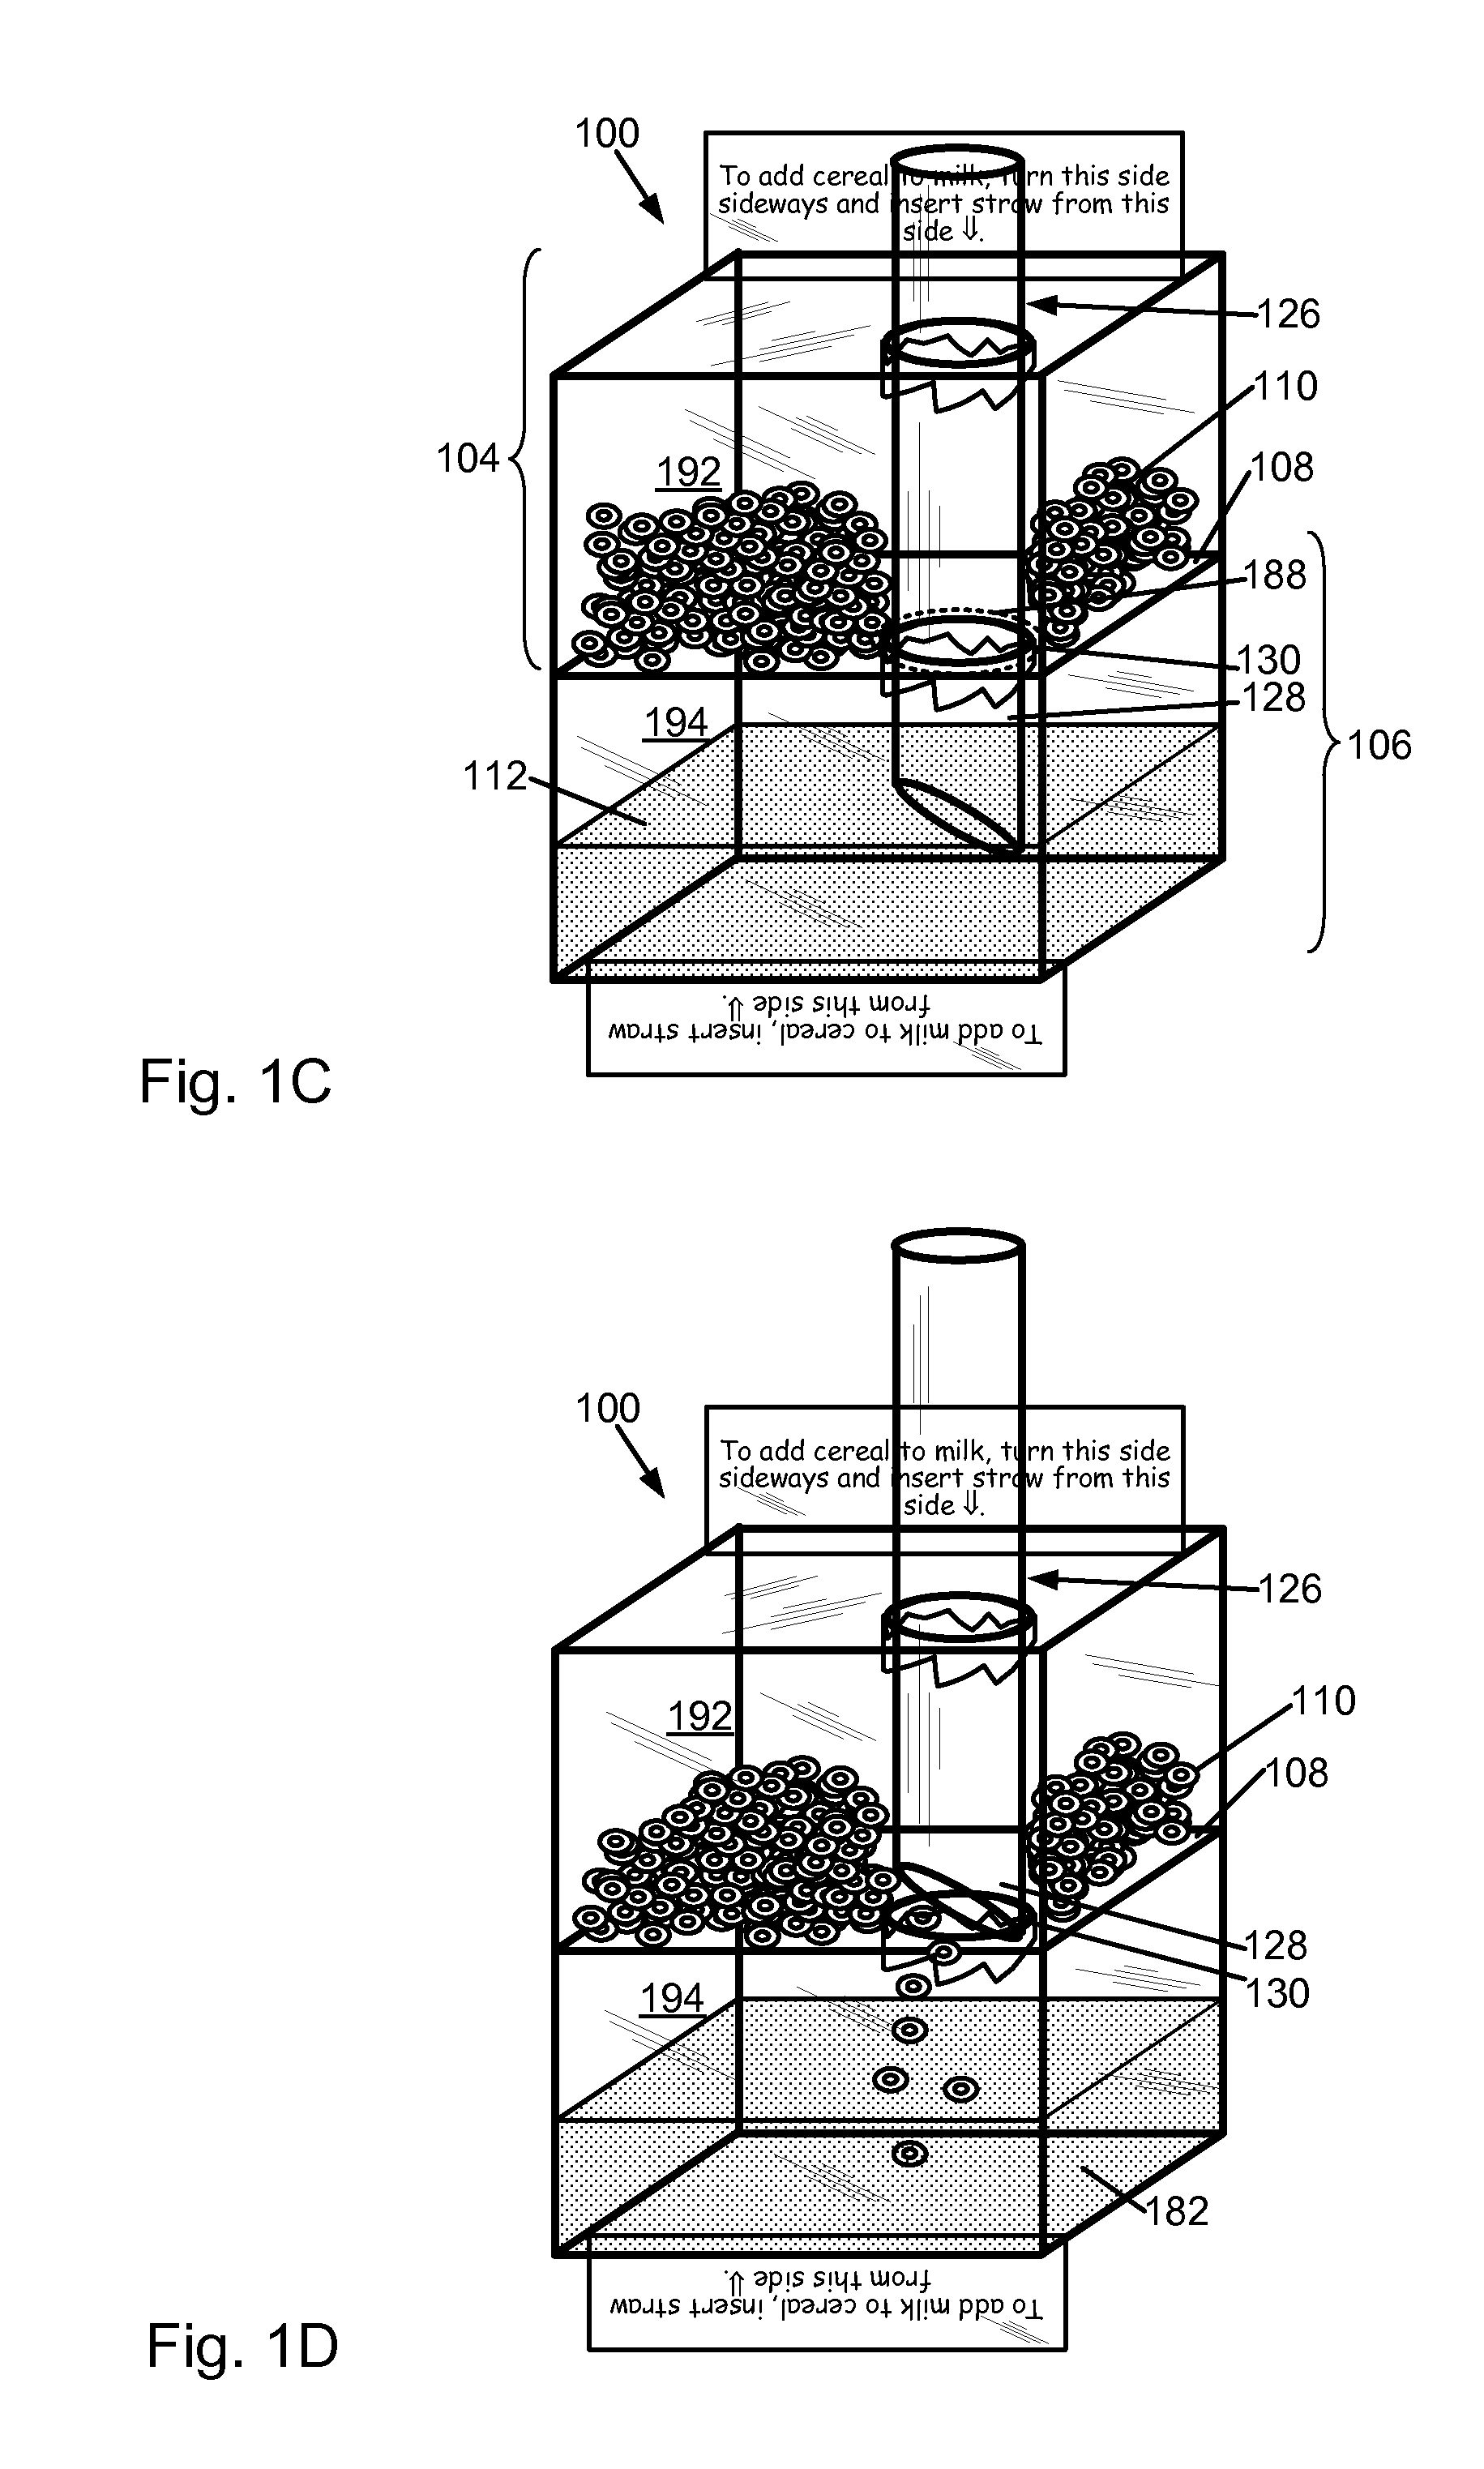 Apparatus and method for manufacturing a package that includes edible substances